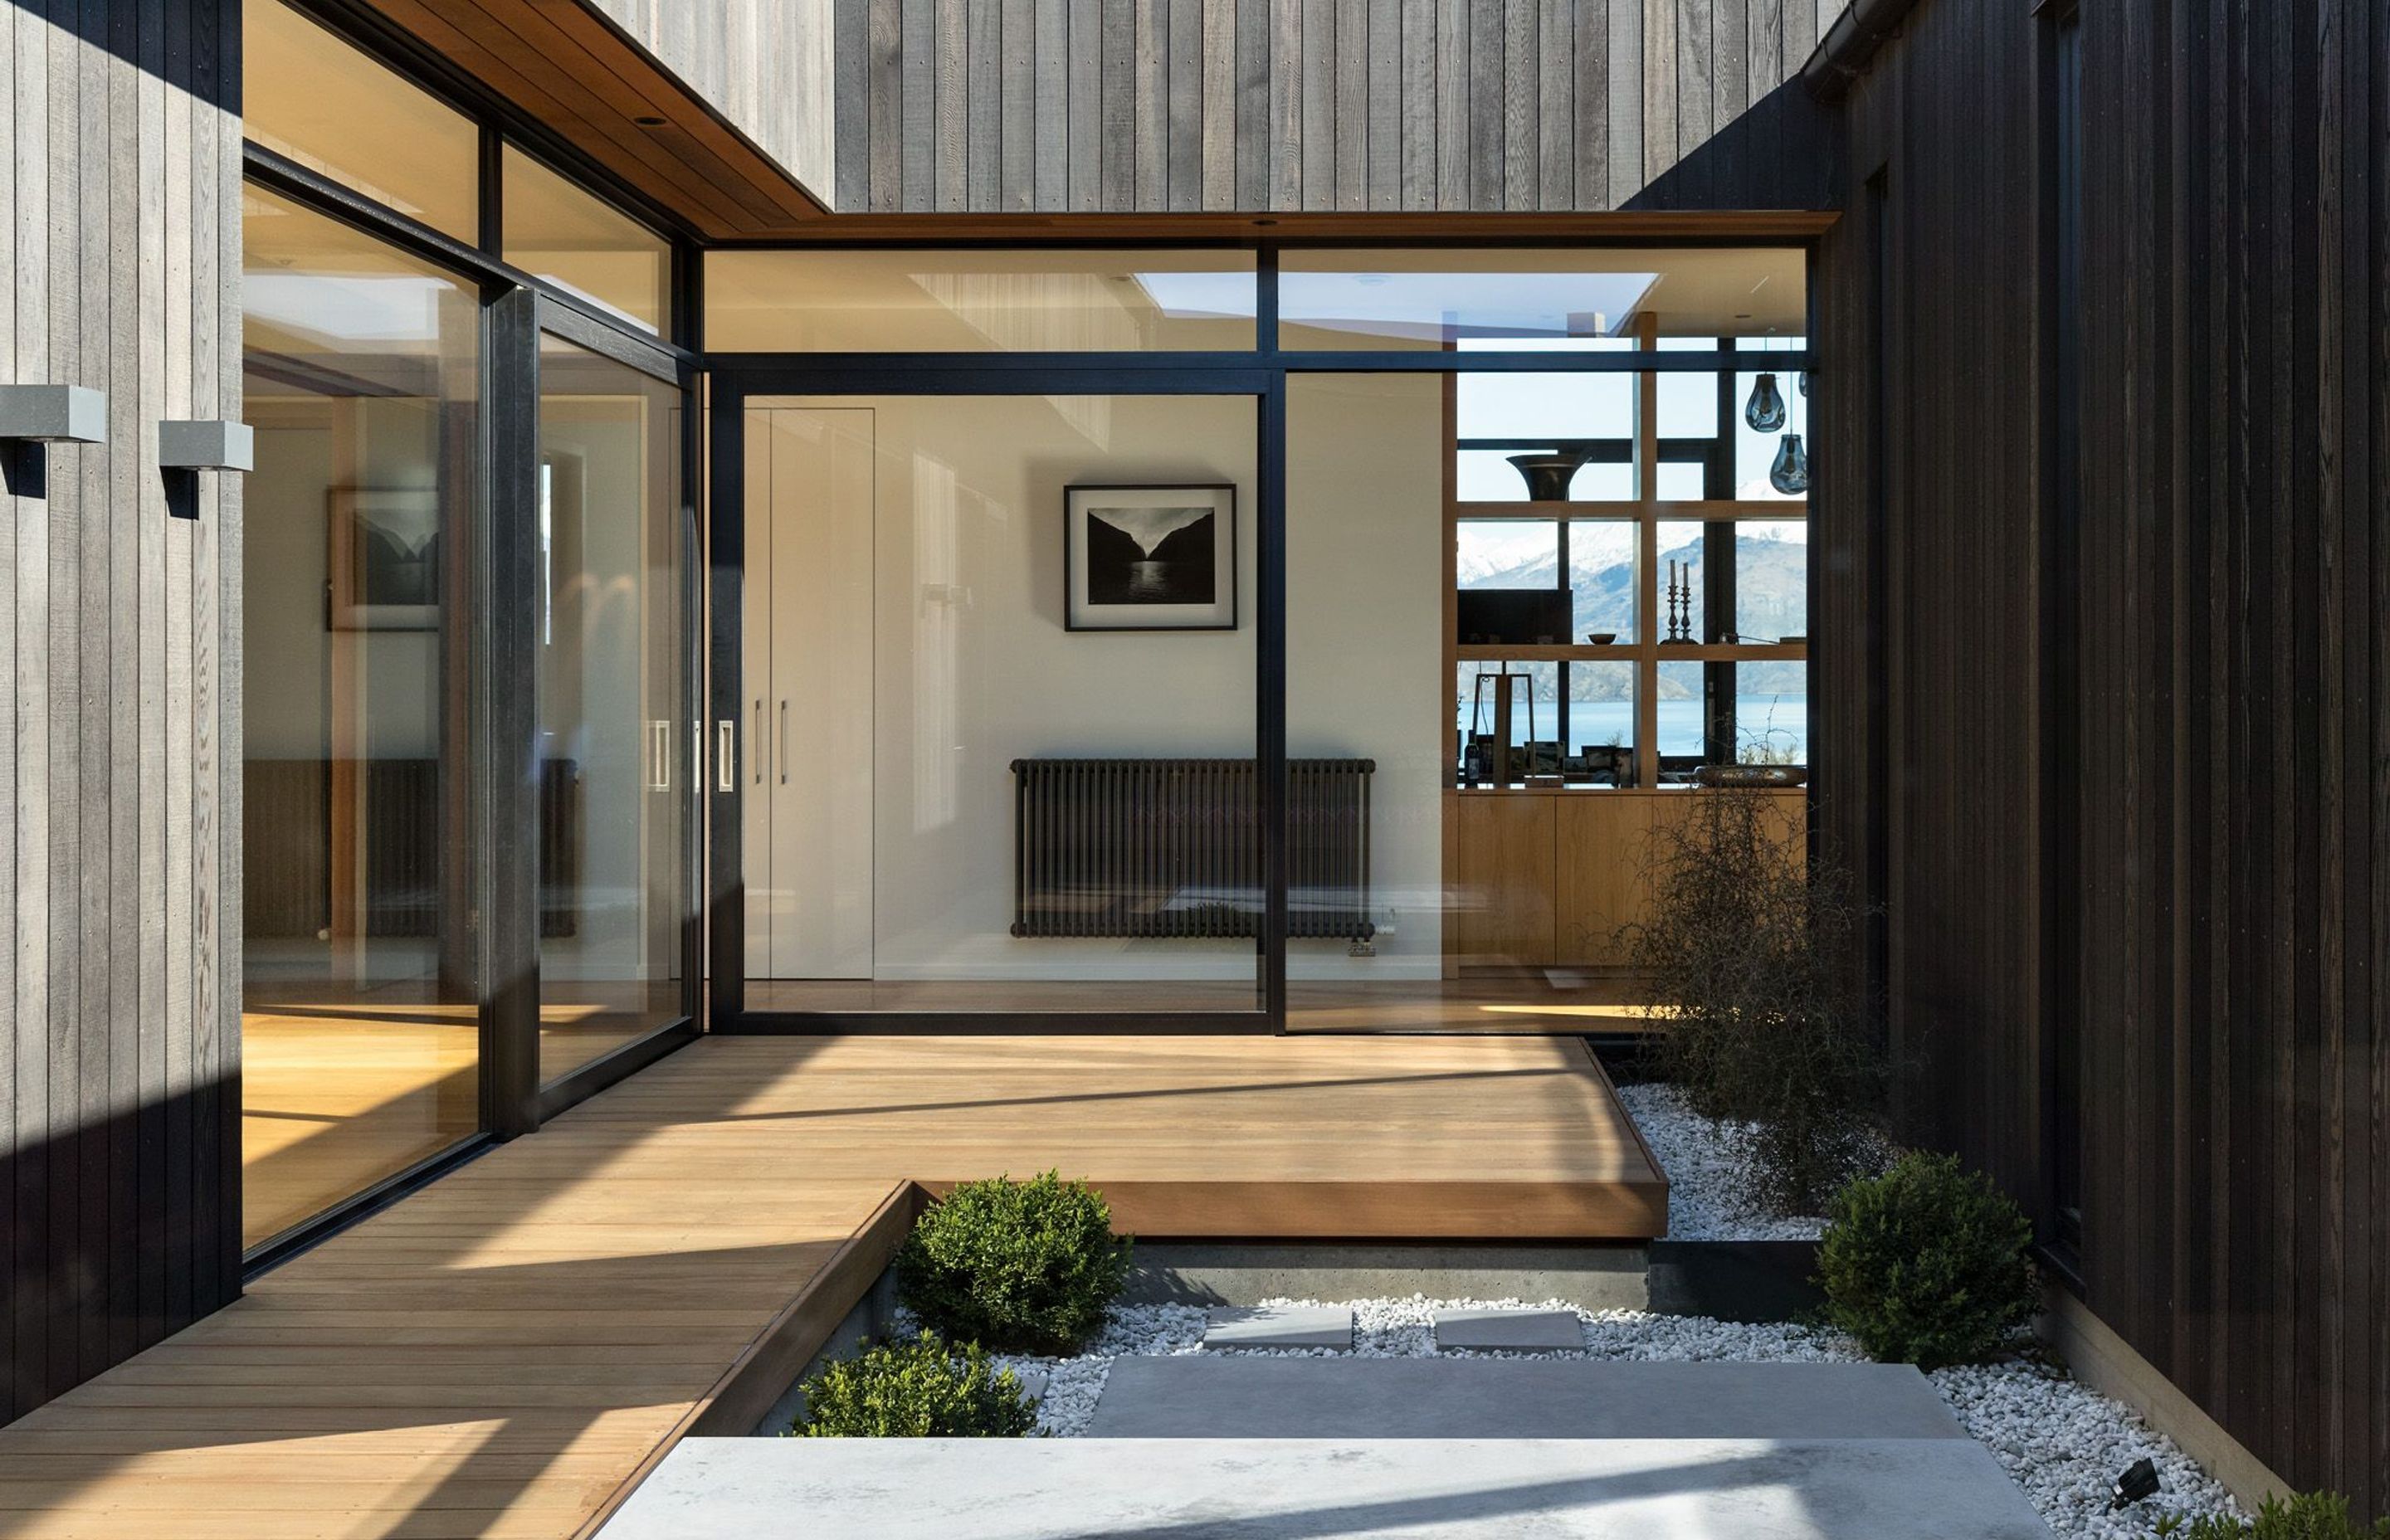 The central interior courtyard with two glass walls with corner opening doors is a light well that transforms otherwise south-facing rooms into areas bathed in sun and light. 